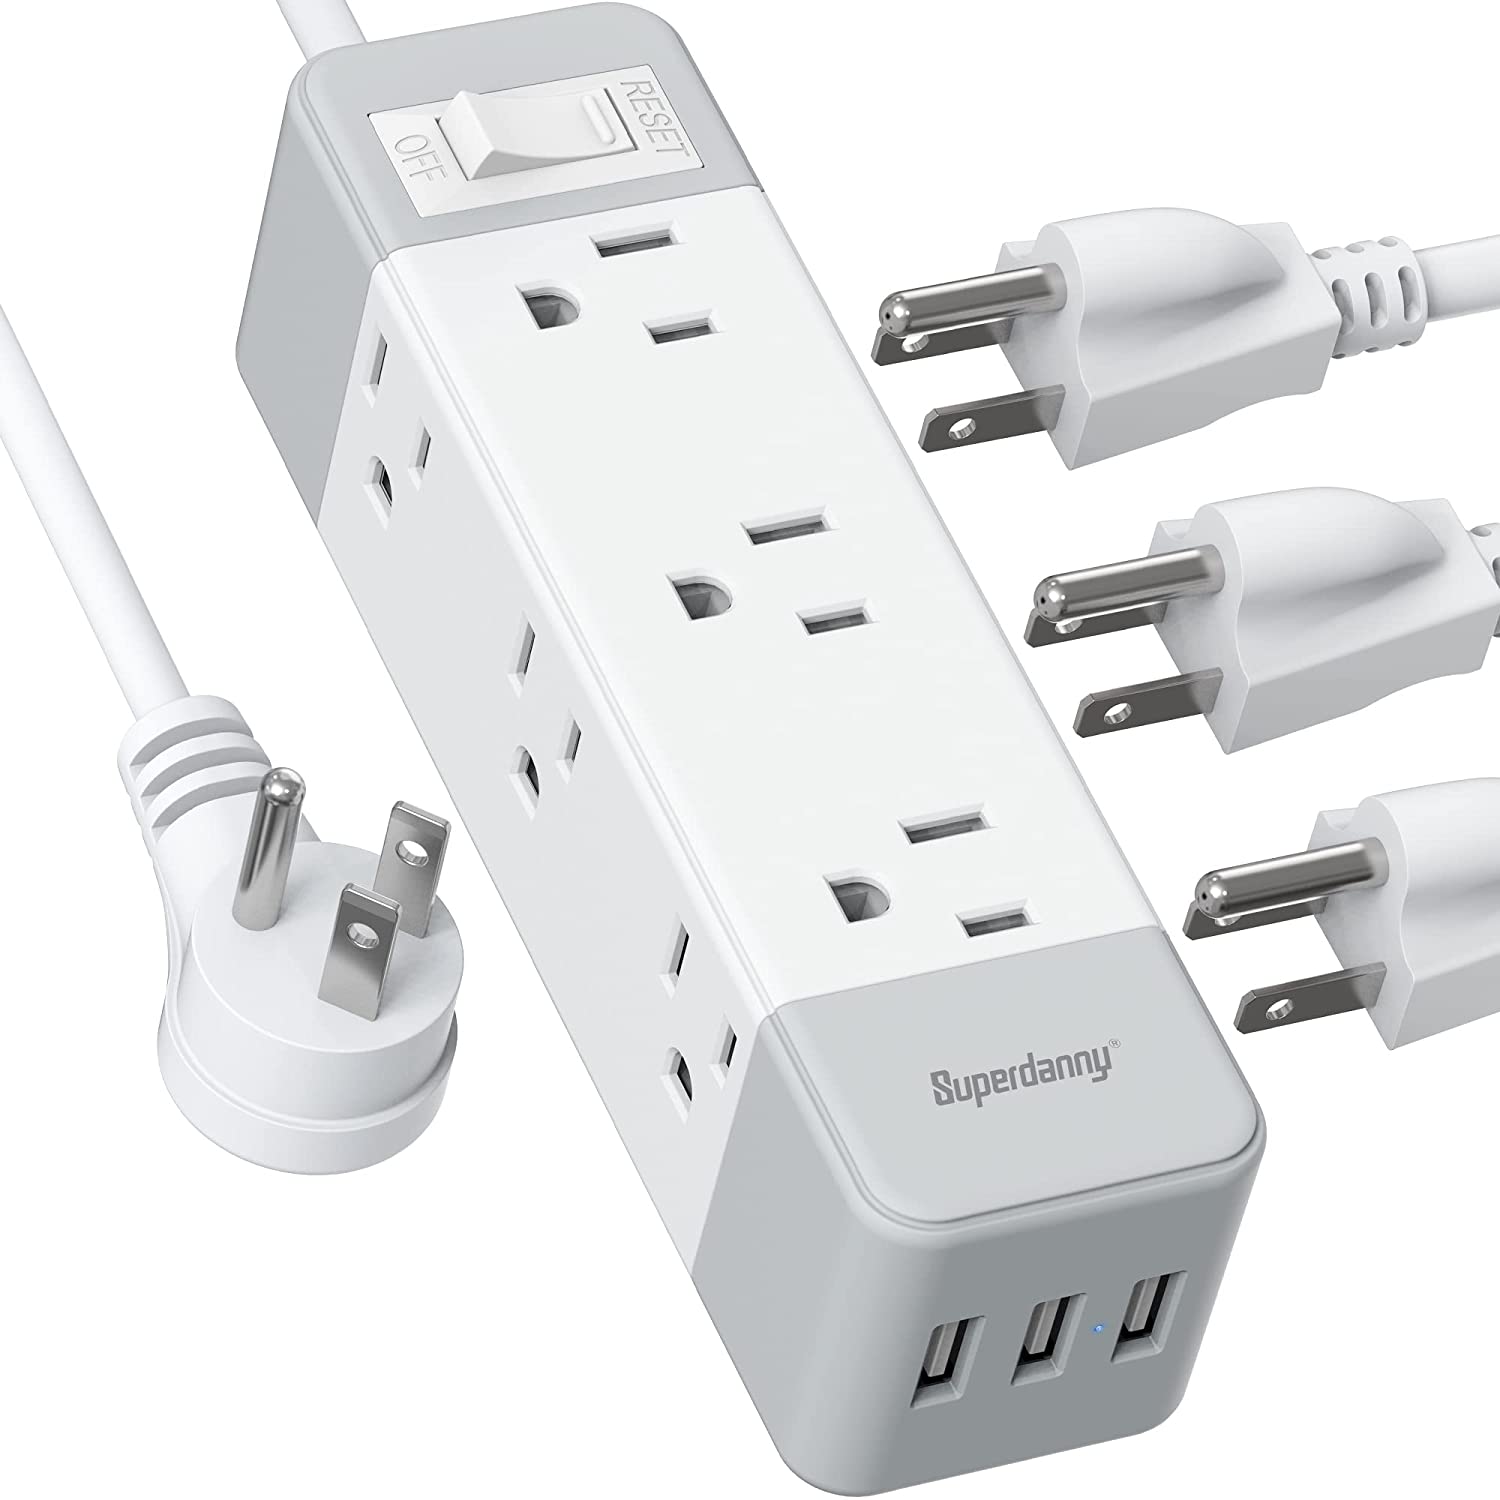 9 Outlets & 3 USB Surge Protector Power Strip with USB Ports